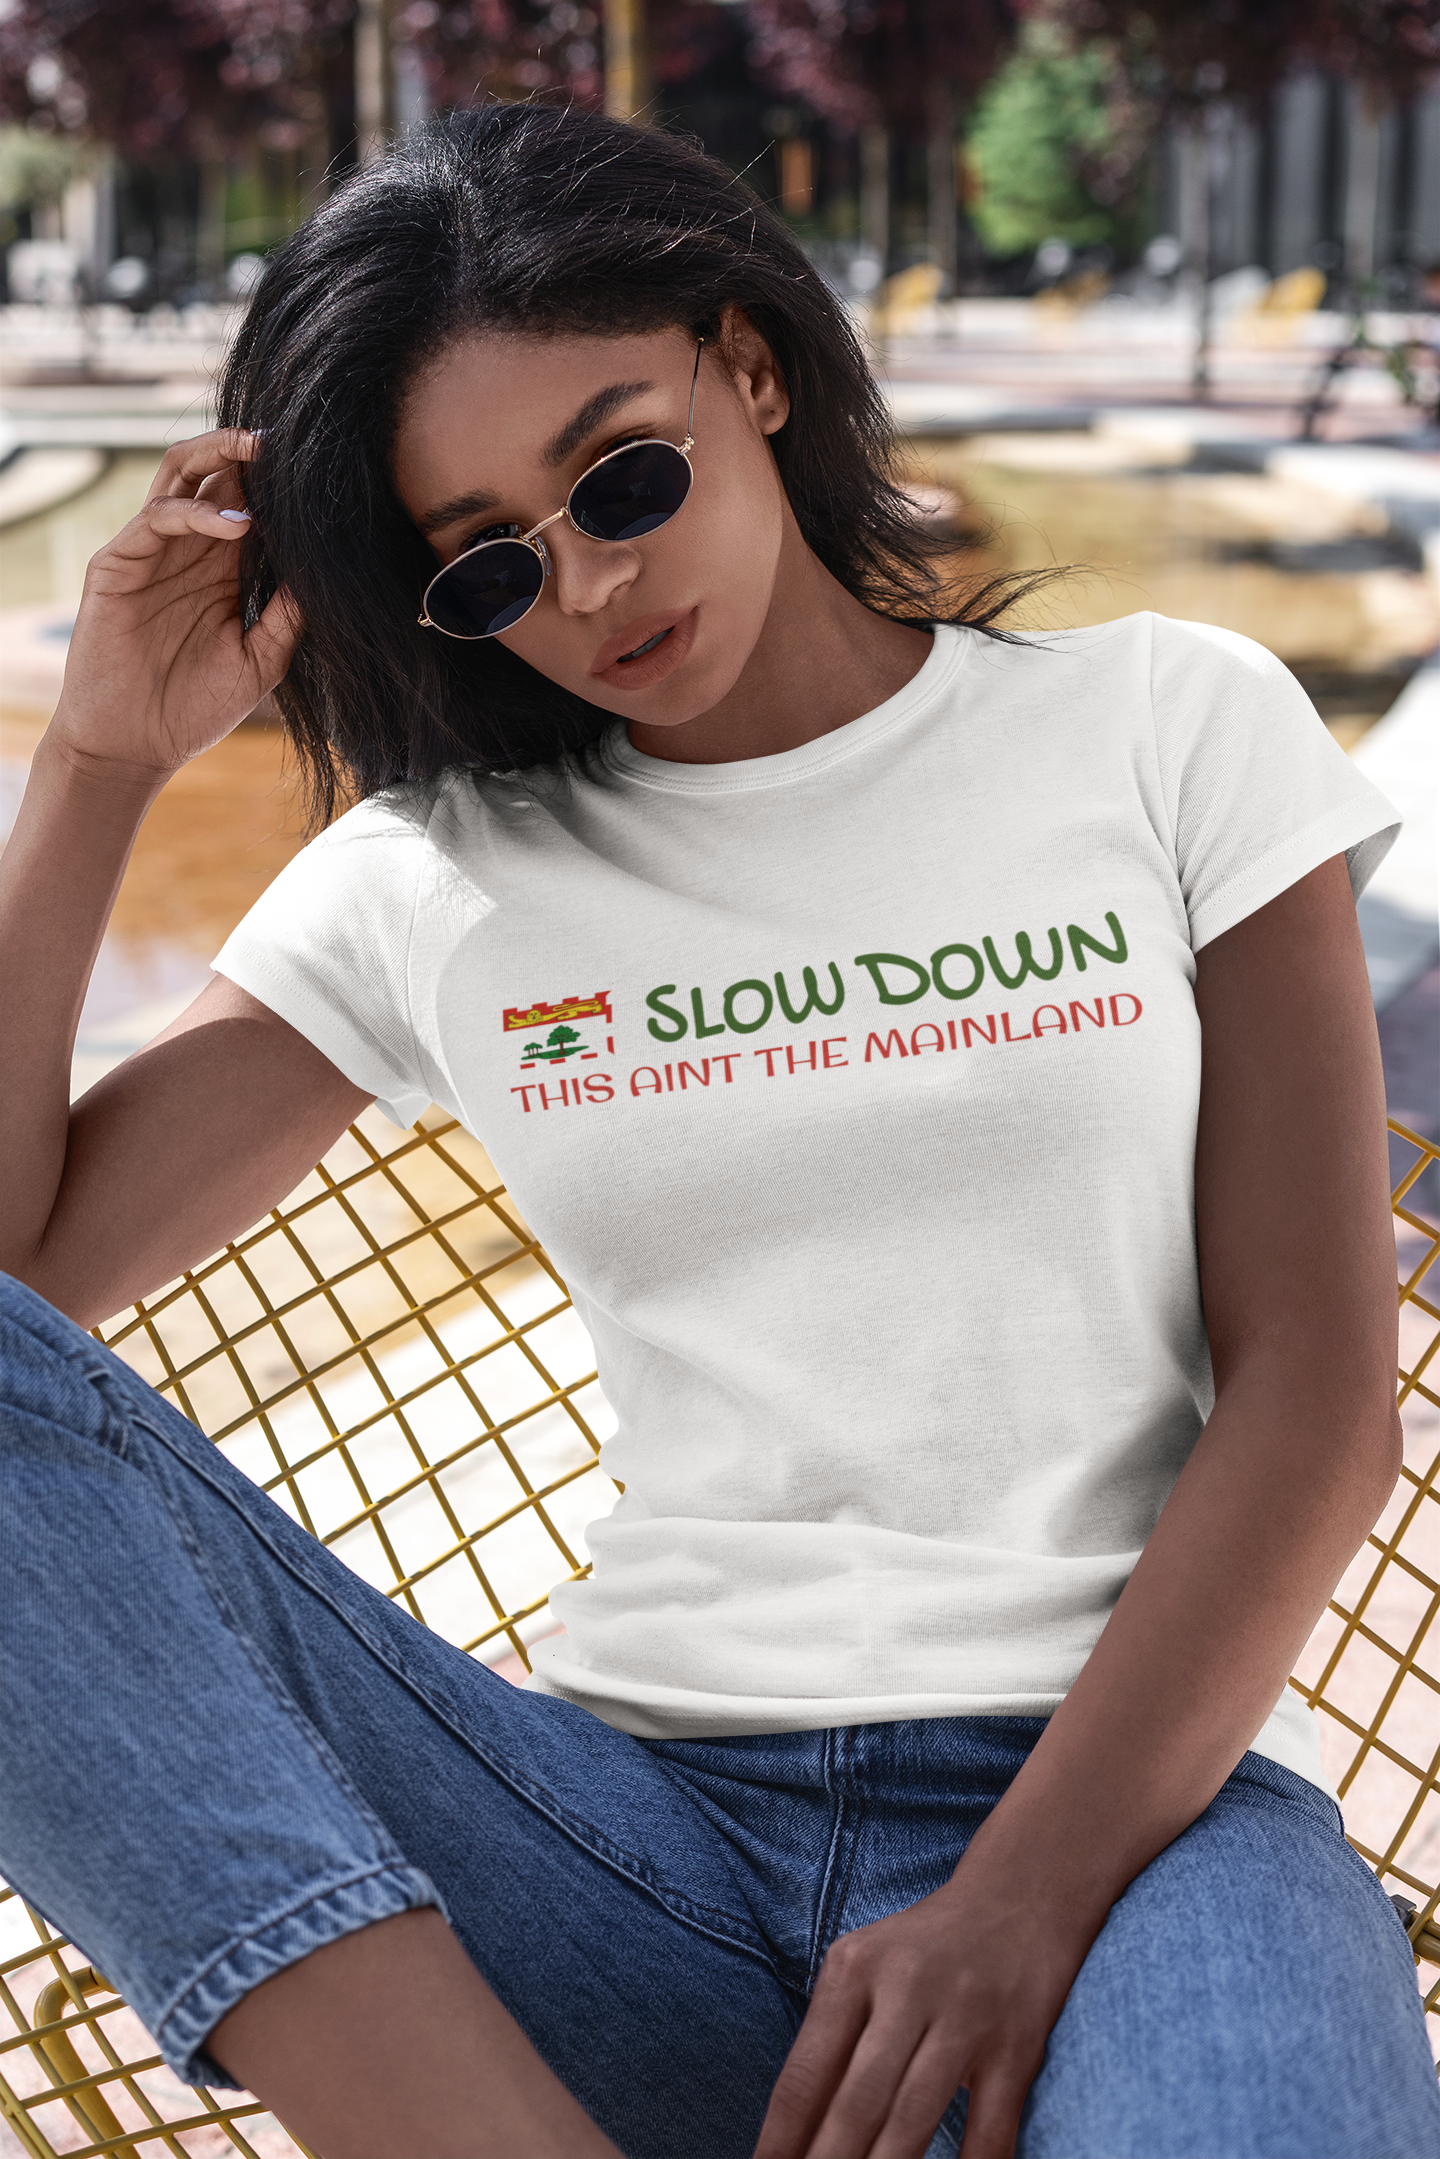 Prince Edward Island  "Slow Down This Ain't The Mainland" Women's Graphic Tee.